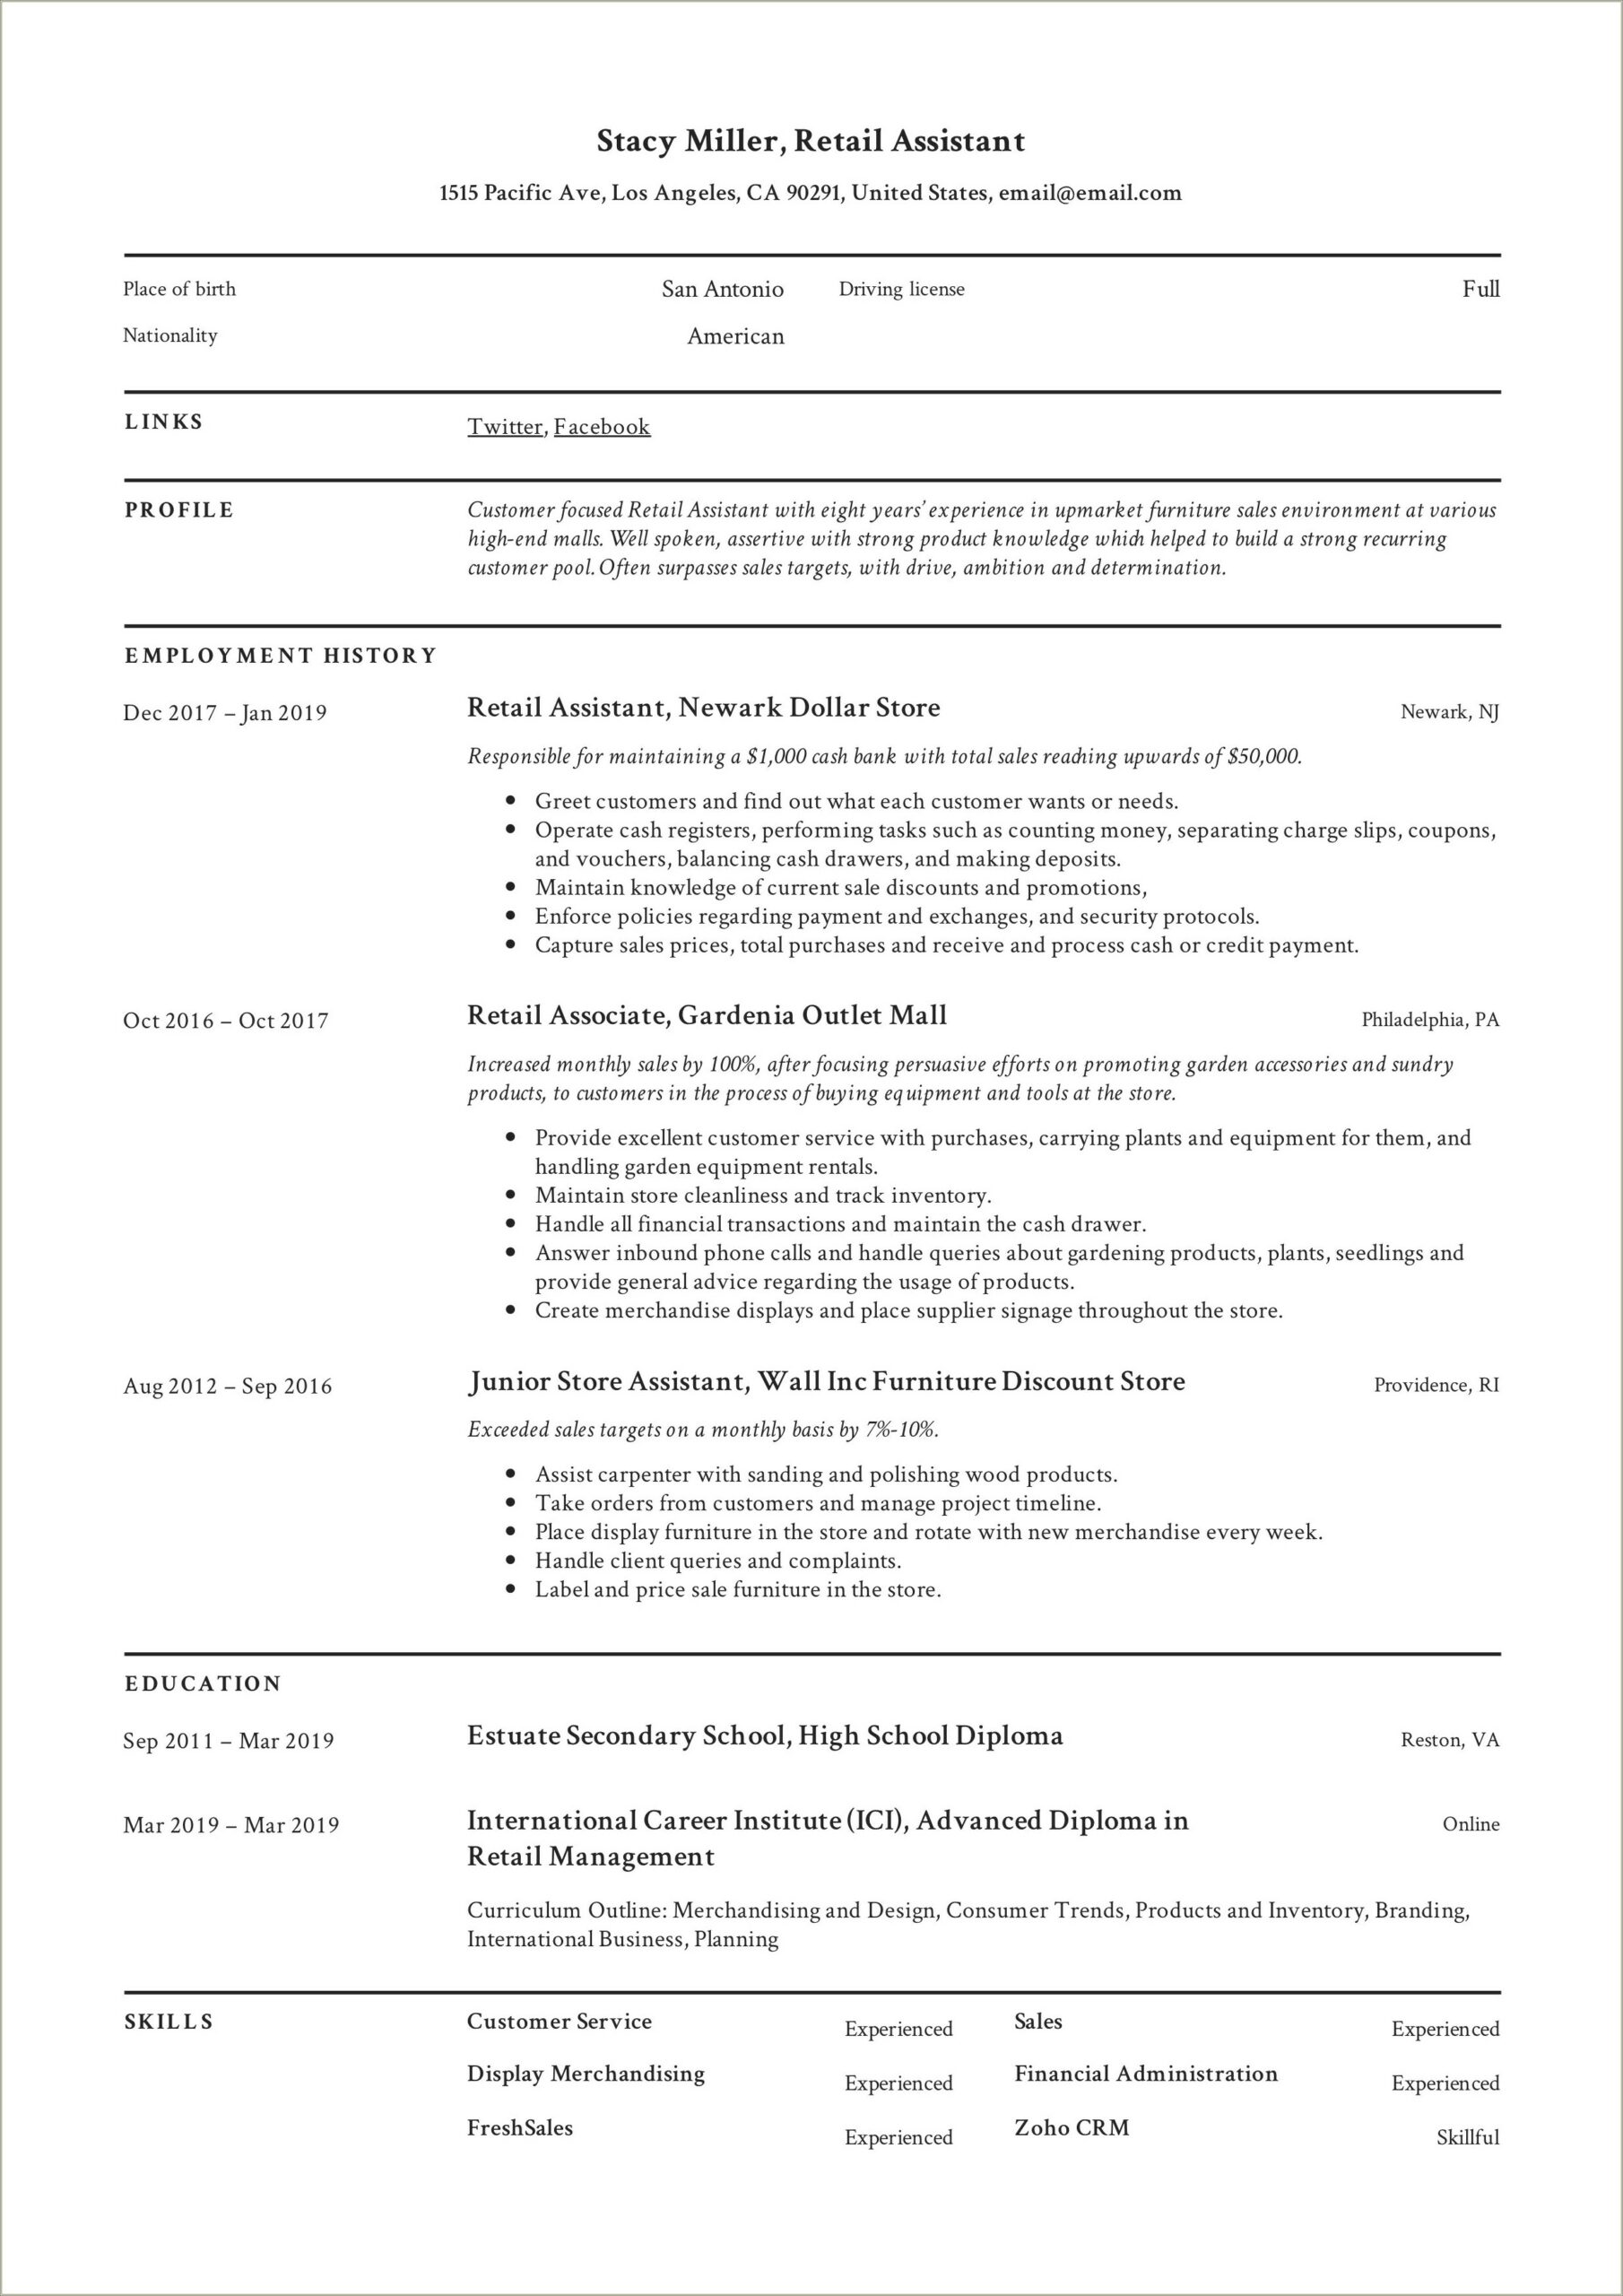 Can You Put Retail Experience On Resume